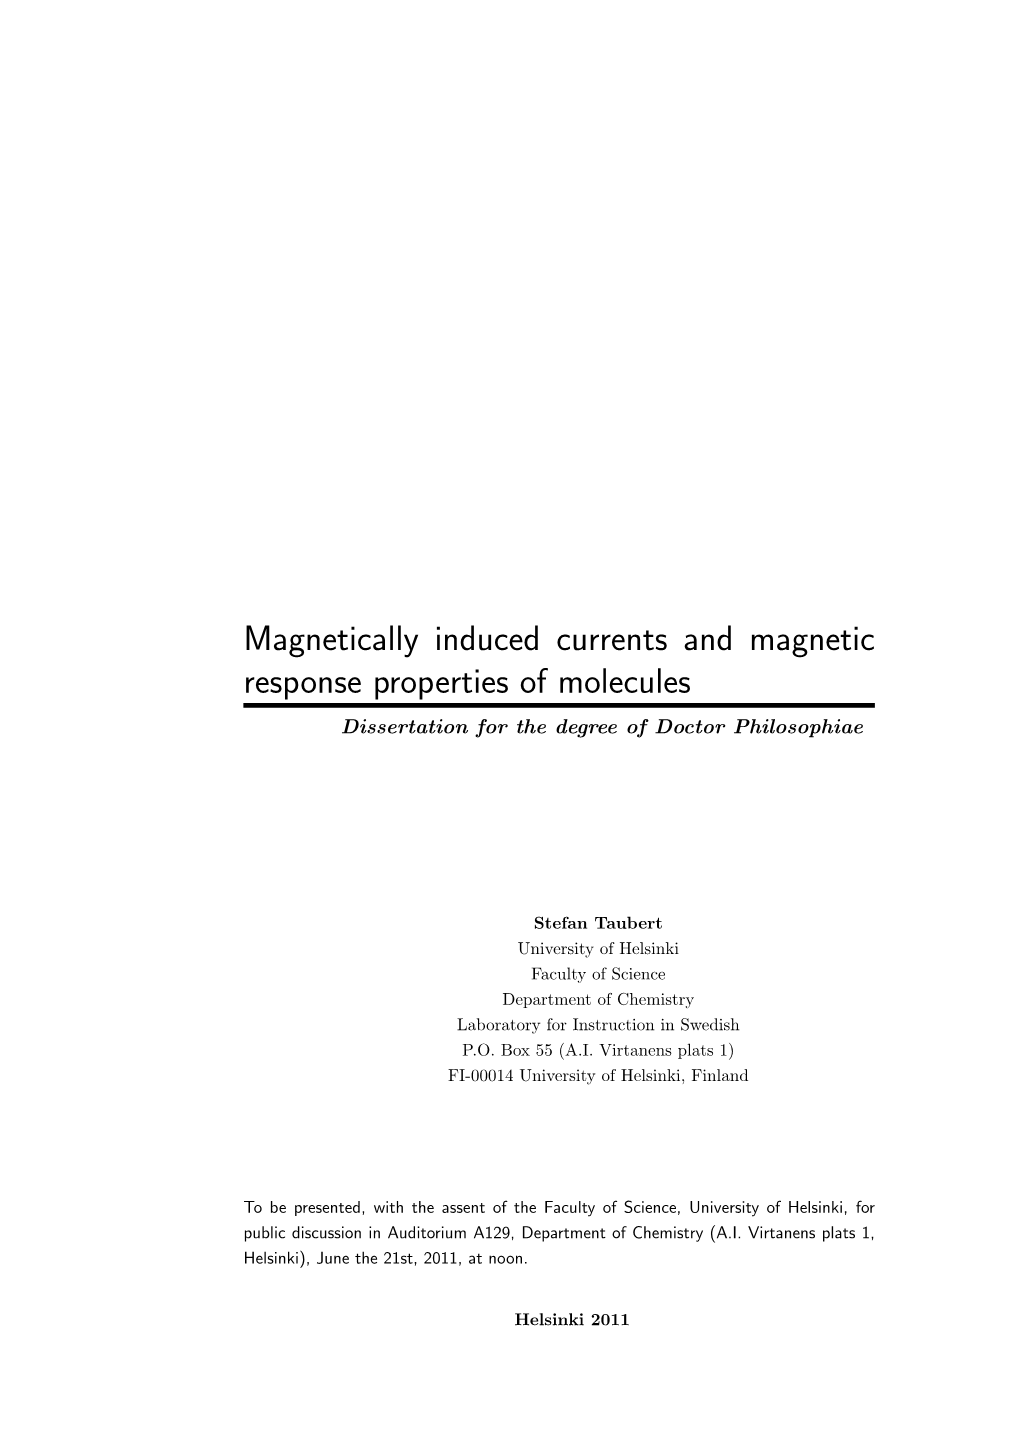 Magnetically Induced Currents and Magnetic Response Properties of Molecules Dissertation for the Degree of Doctor Philosophiae